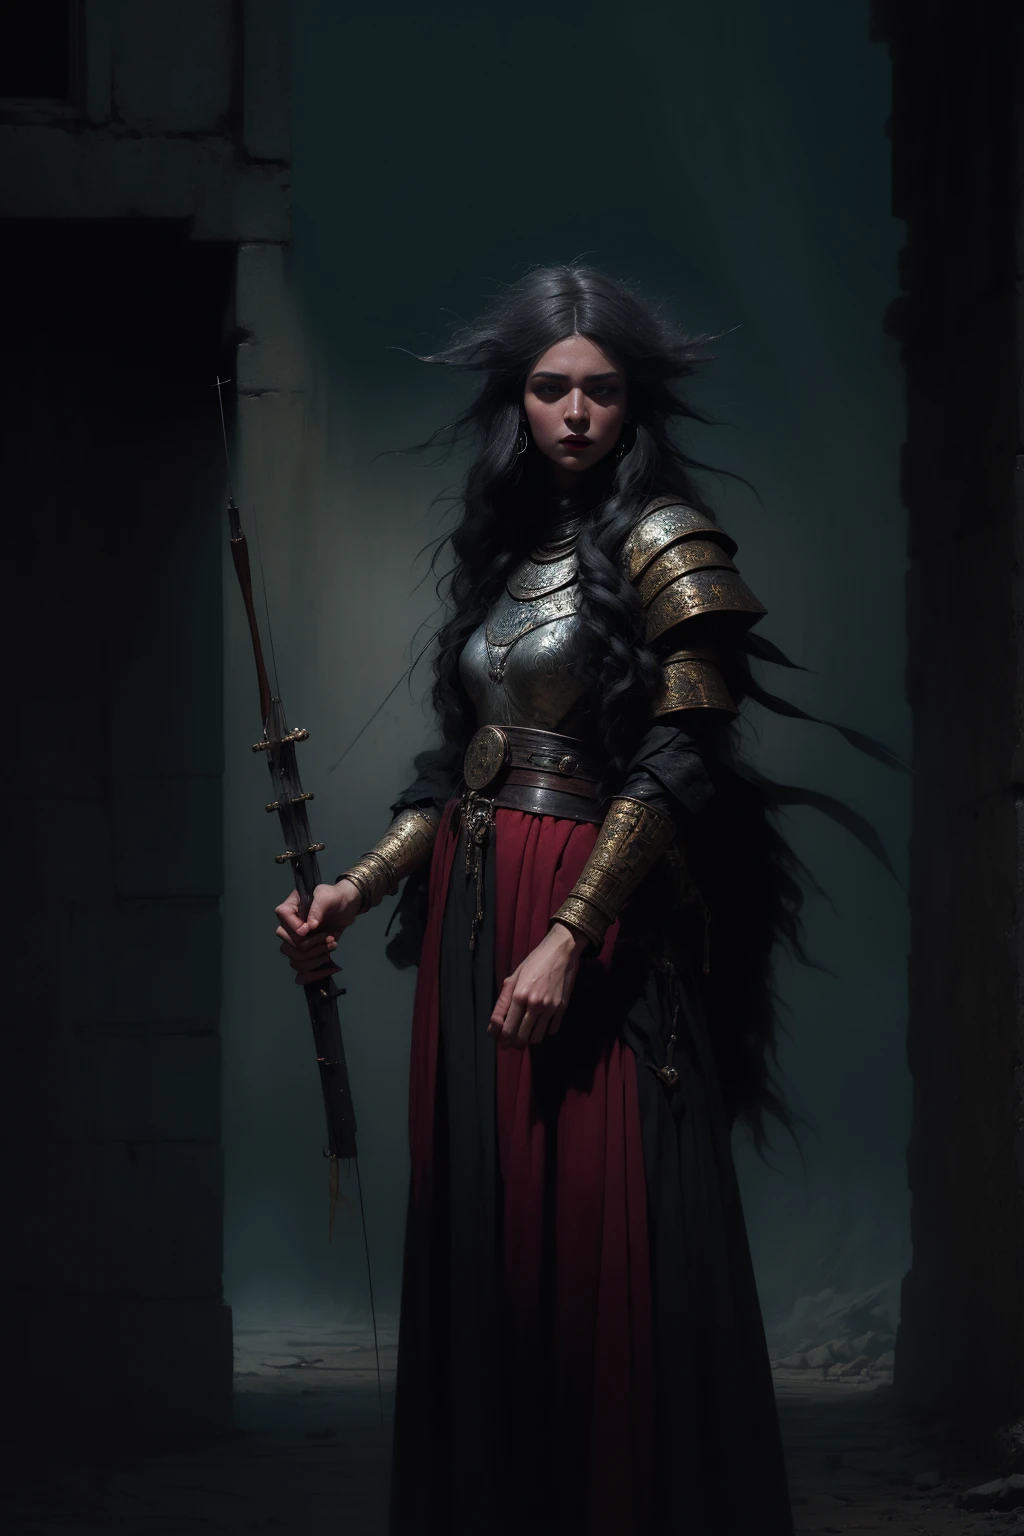 1 girl, archer:1.5, bow and arrow in her hand:1.4, detailed anatomy, fantasy, medieval, detailed face, detailed eyes, detailed lips, loose hair, natural background, dynamic pose, cinematic lighting, vibrant colors, dramatic atmosphere ( best quality, 4k, 8k, high resolution, masterpiece: 1.2), ultra detailed, (realistic, photorealistic, photorealistic: 1.37), cinematic composition